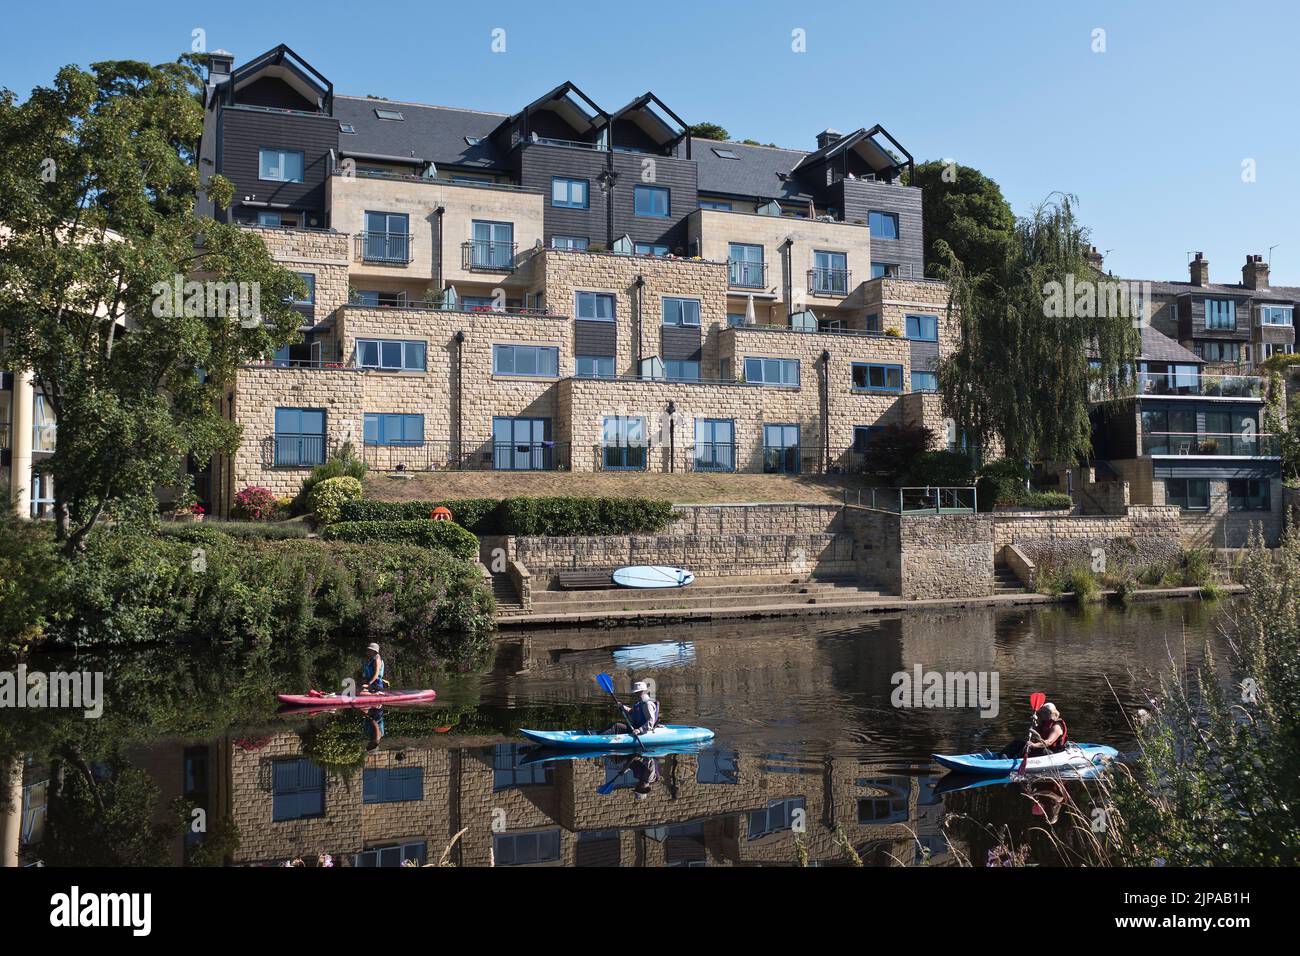 dh River Wharfe WETHERBY WEST YORKSHIRE Aprenda a paddle paddleboards Canoistas instructor inglaterra Reino Unido paddleboarding Canoeist paddle boarding Foto de stock